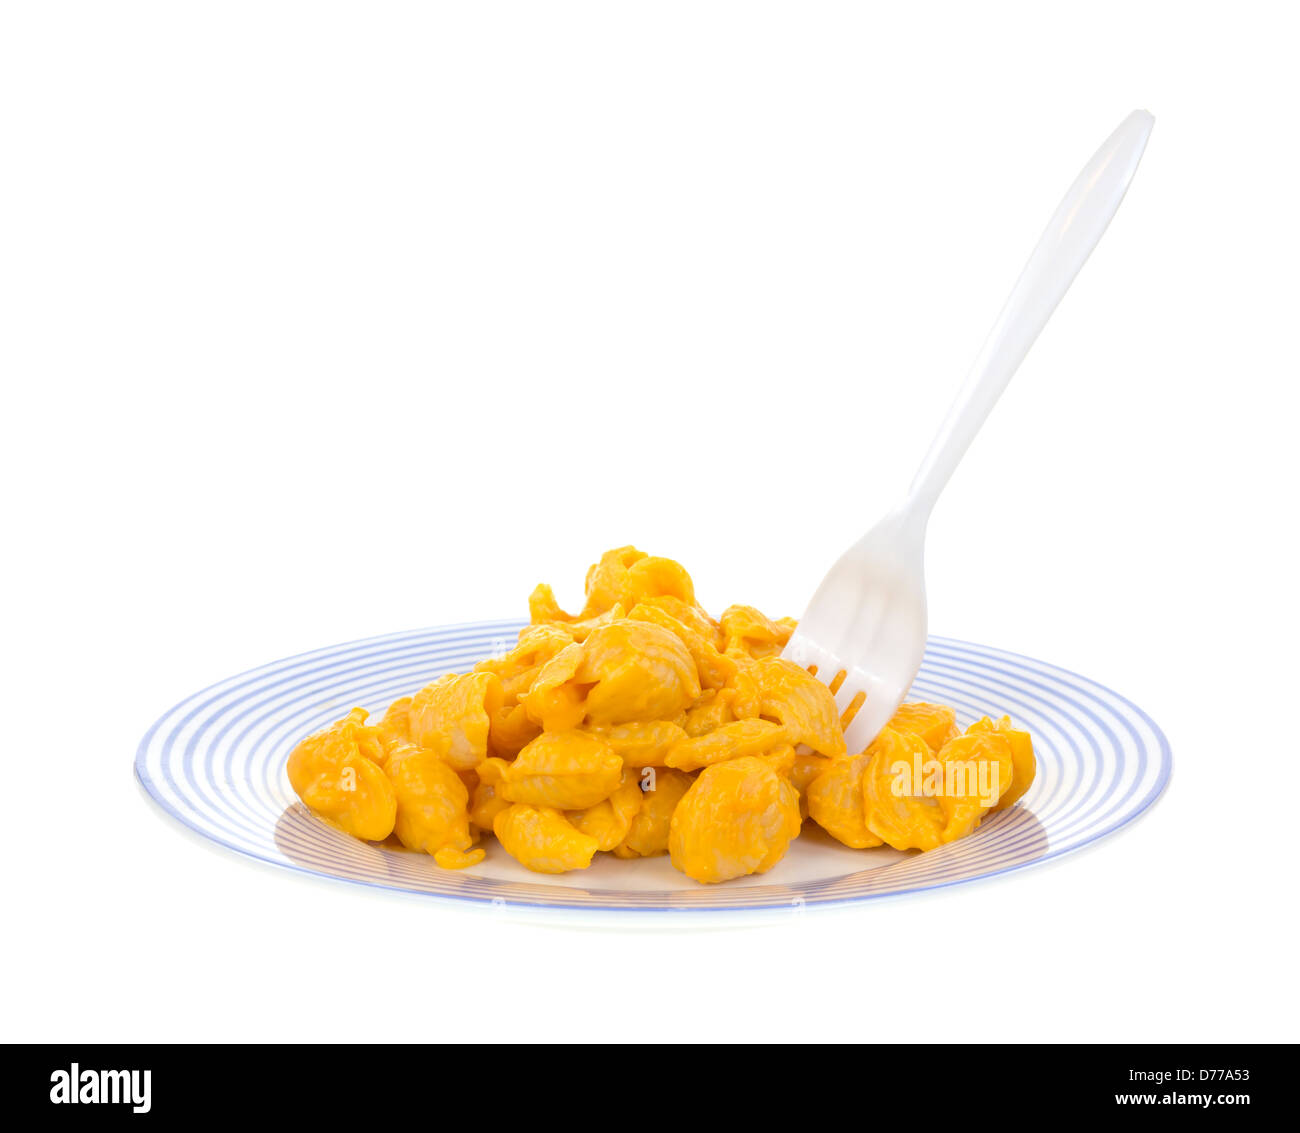 A blue striped plate with a serving of pasta shells with cheese sauce and a fork sticking into the meal. Stock Photo